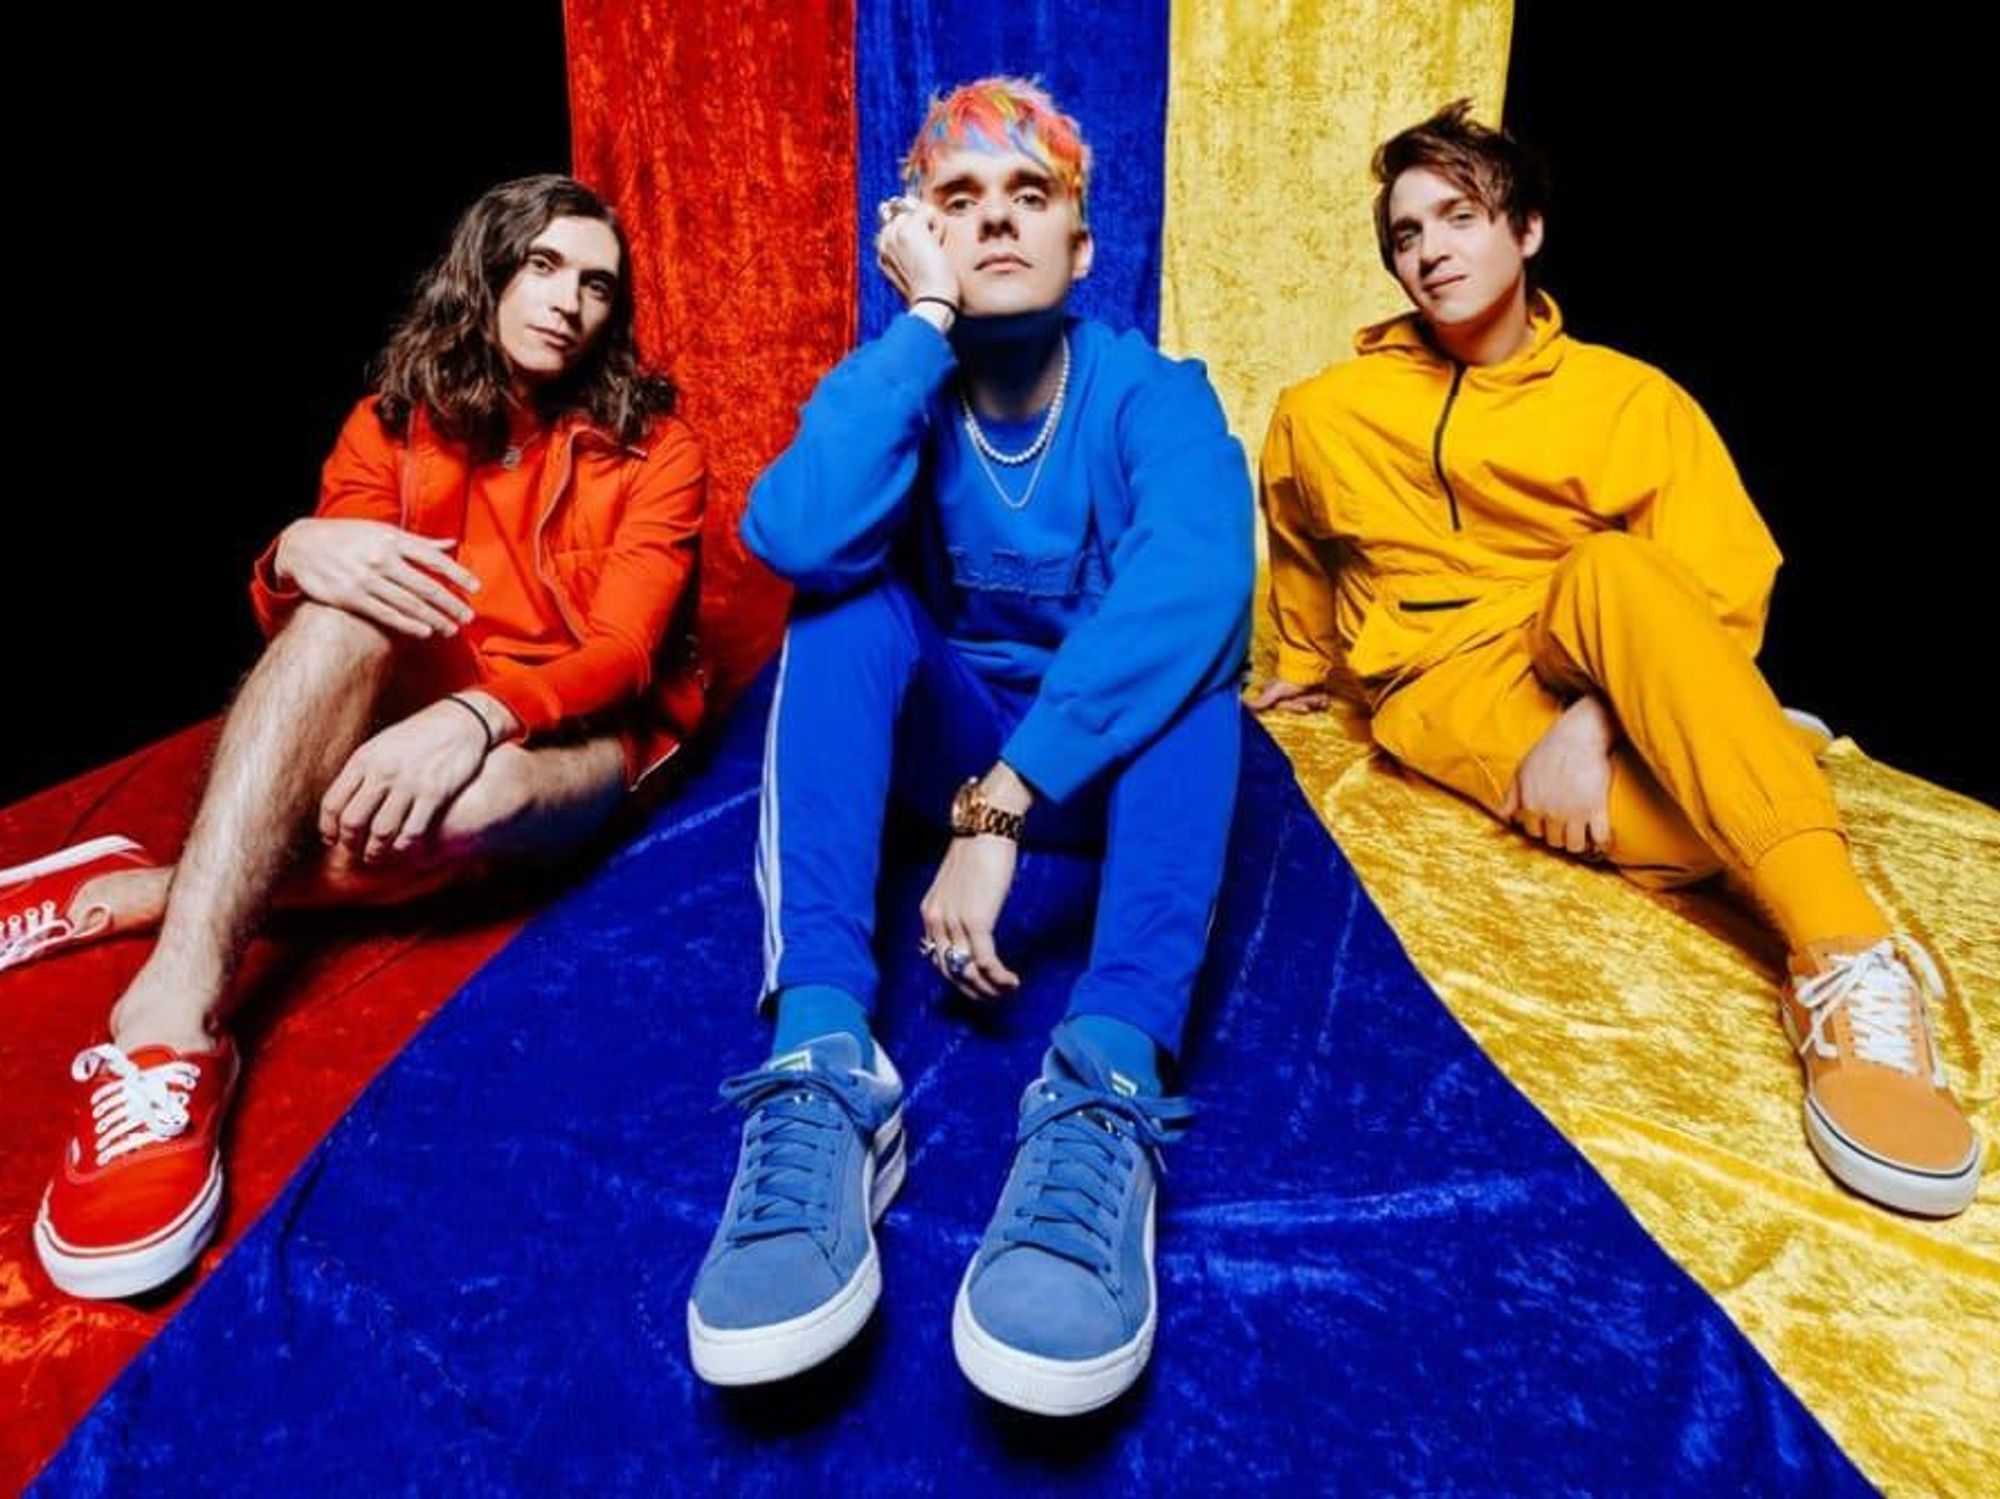 Waterparks band